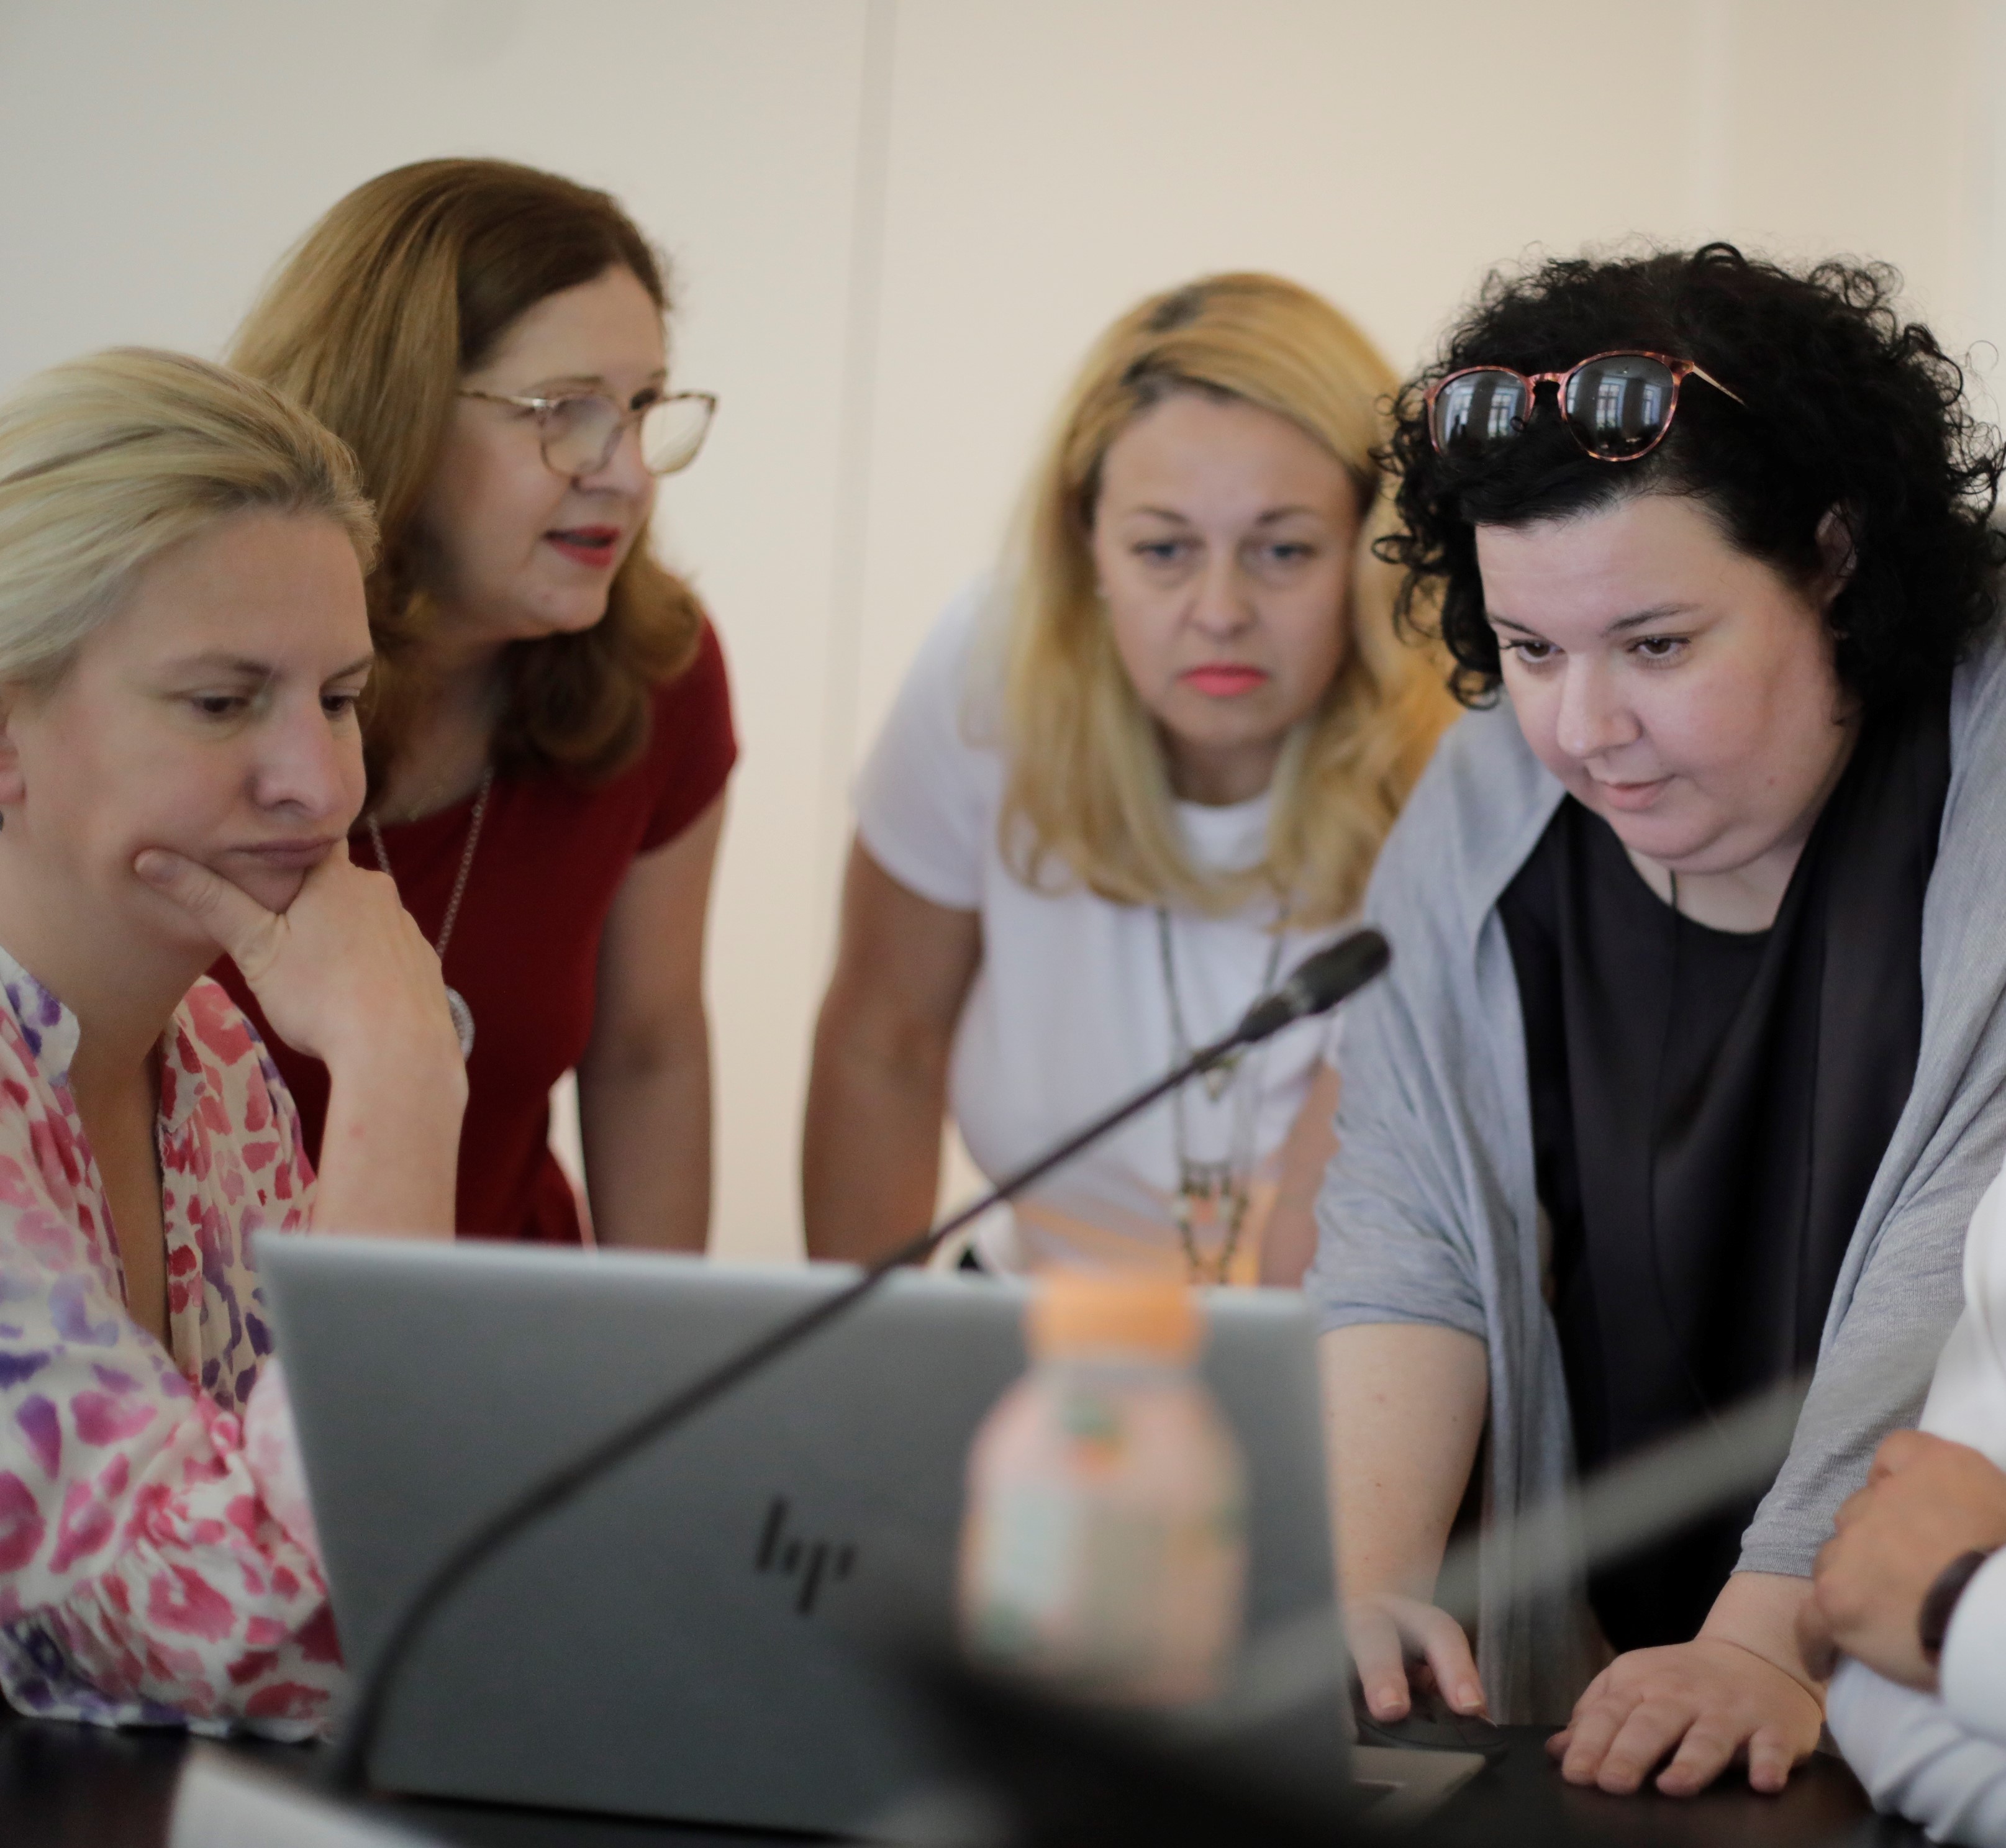 People look at a laptop screen together at a workshop.